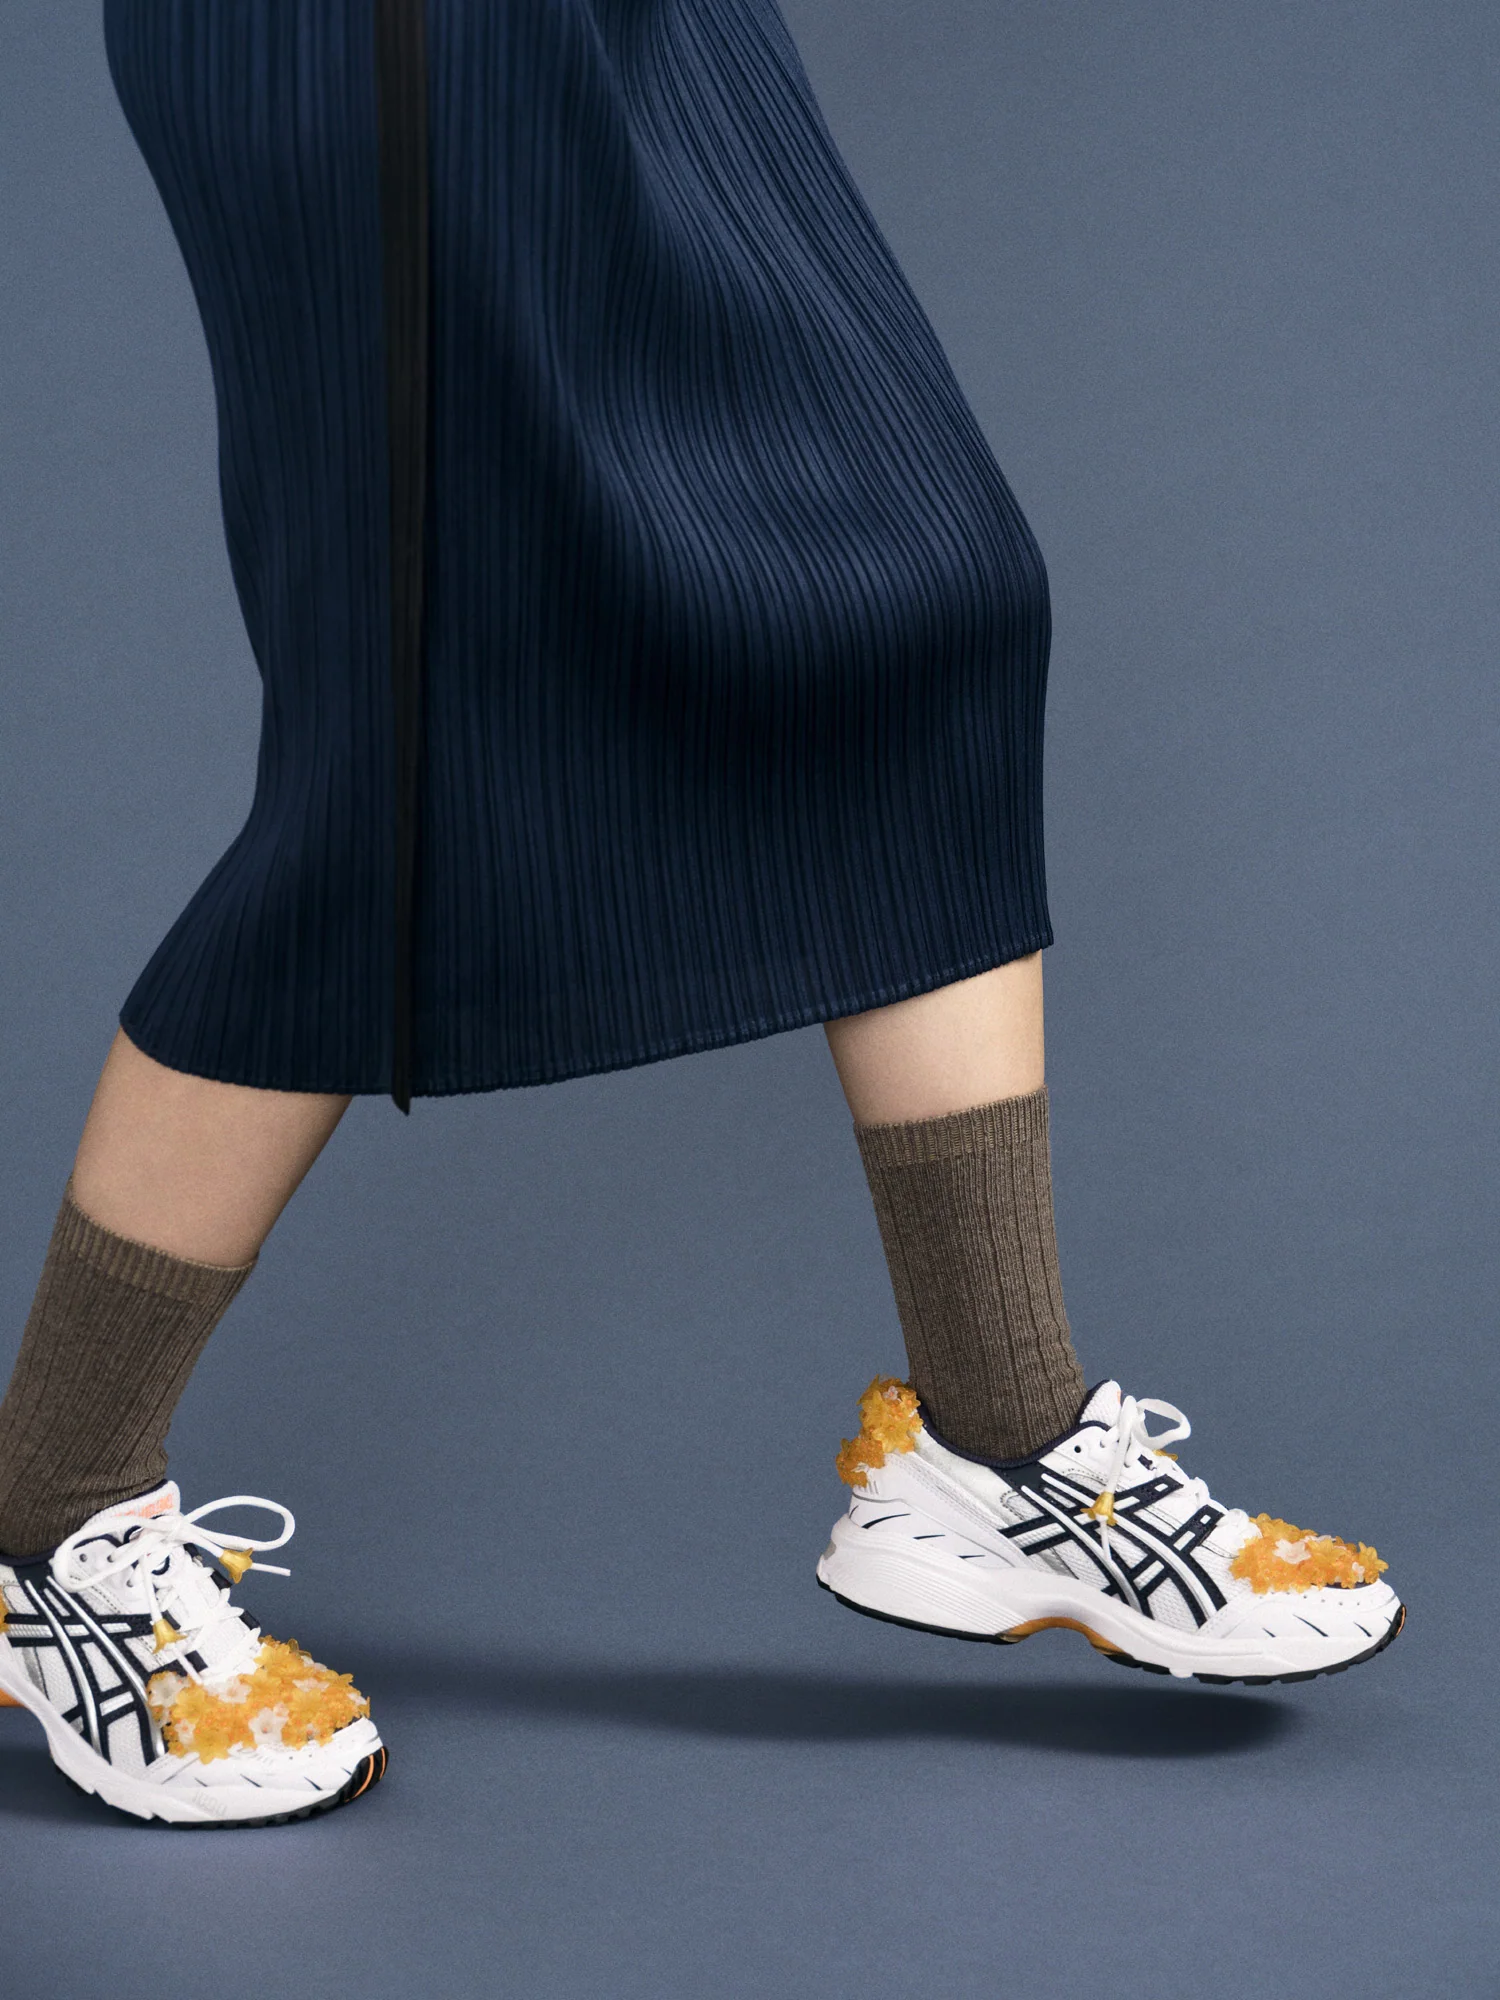 brown cashmere socks are paired with a skirt and tennis shoes. 